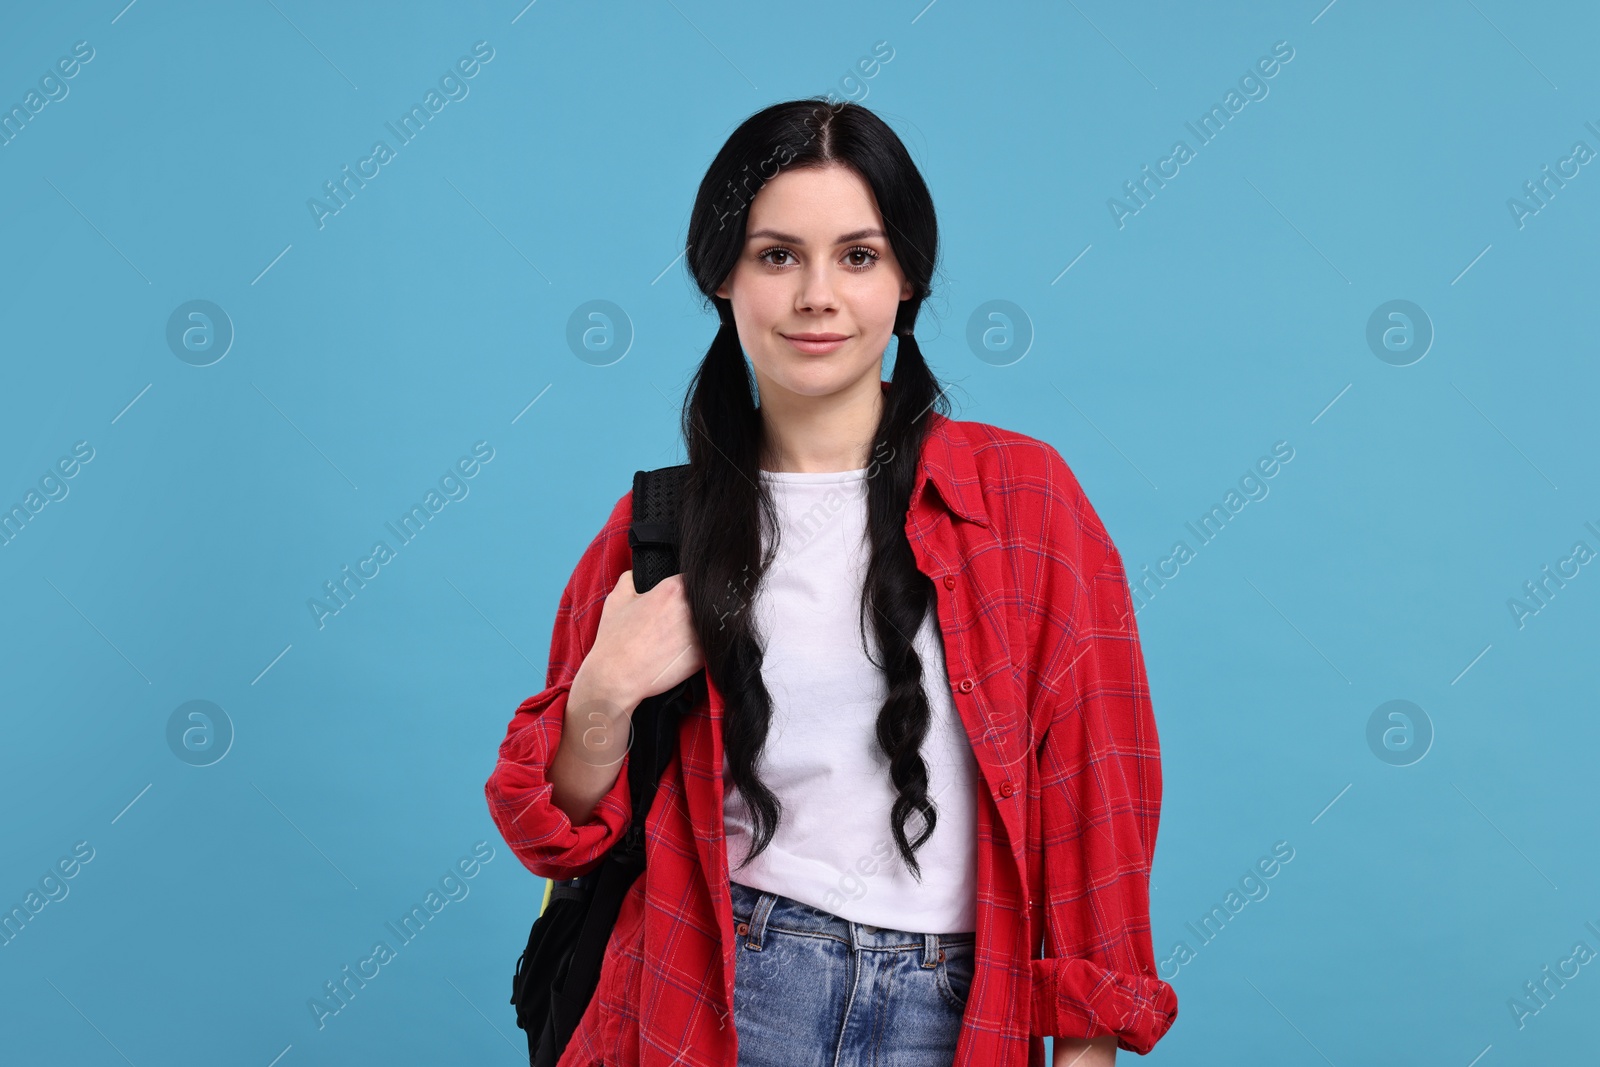 Photo of Student with backpack on light blue background